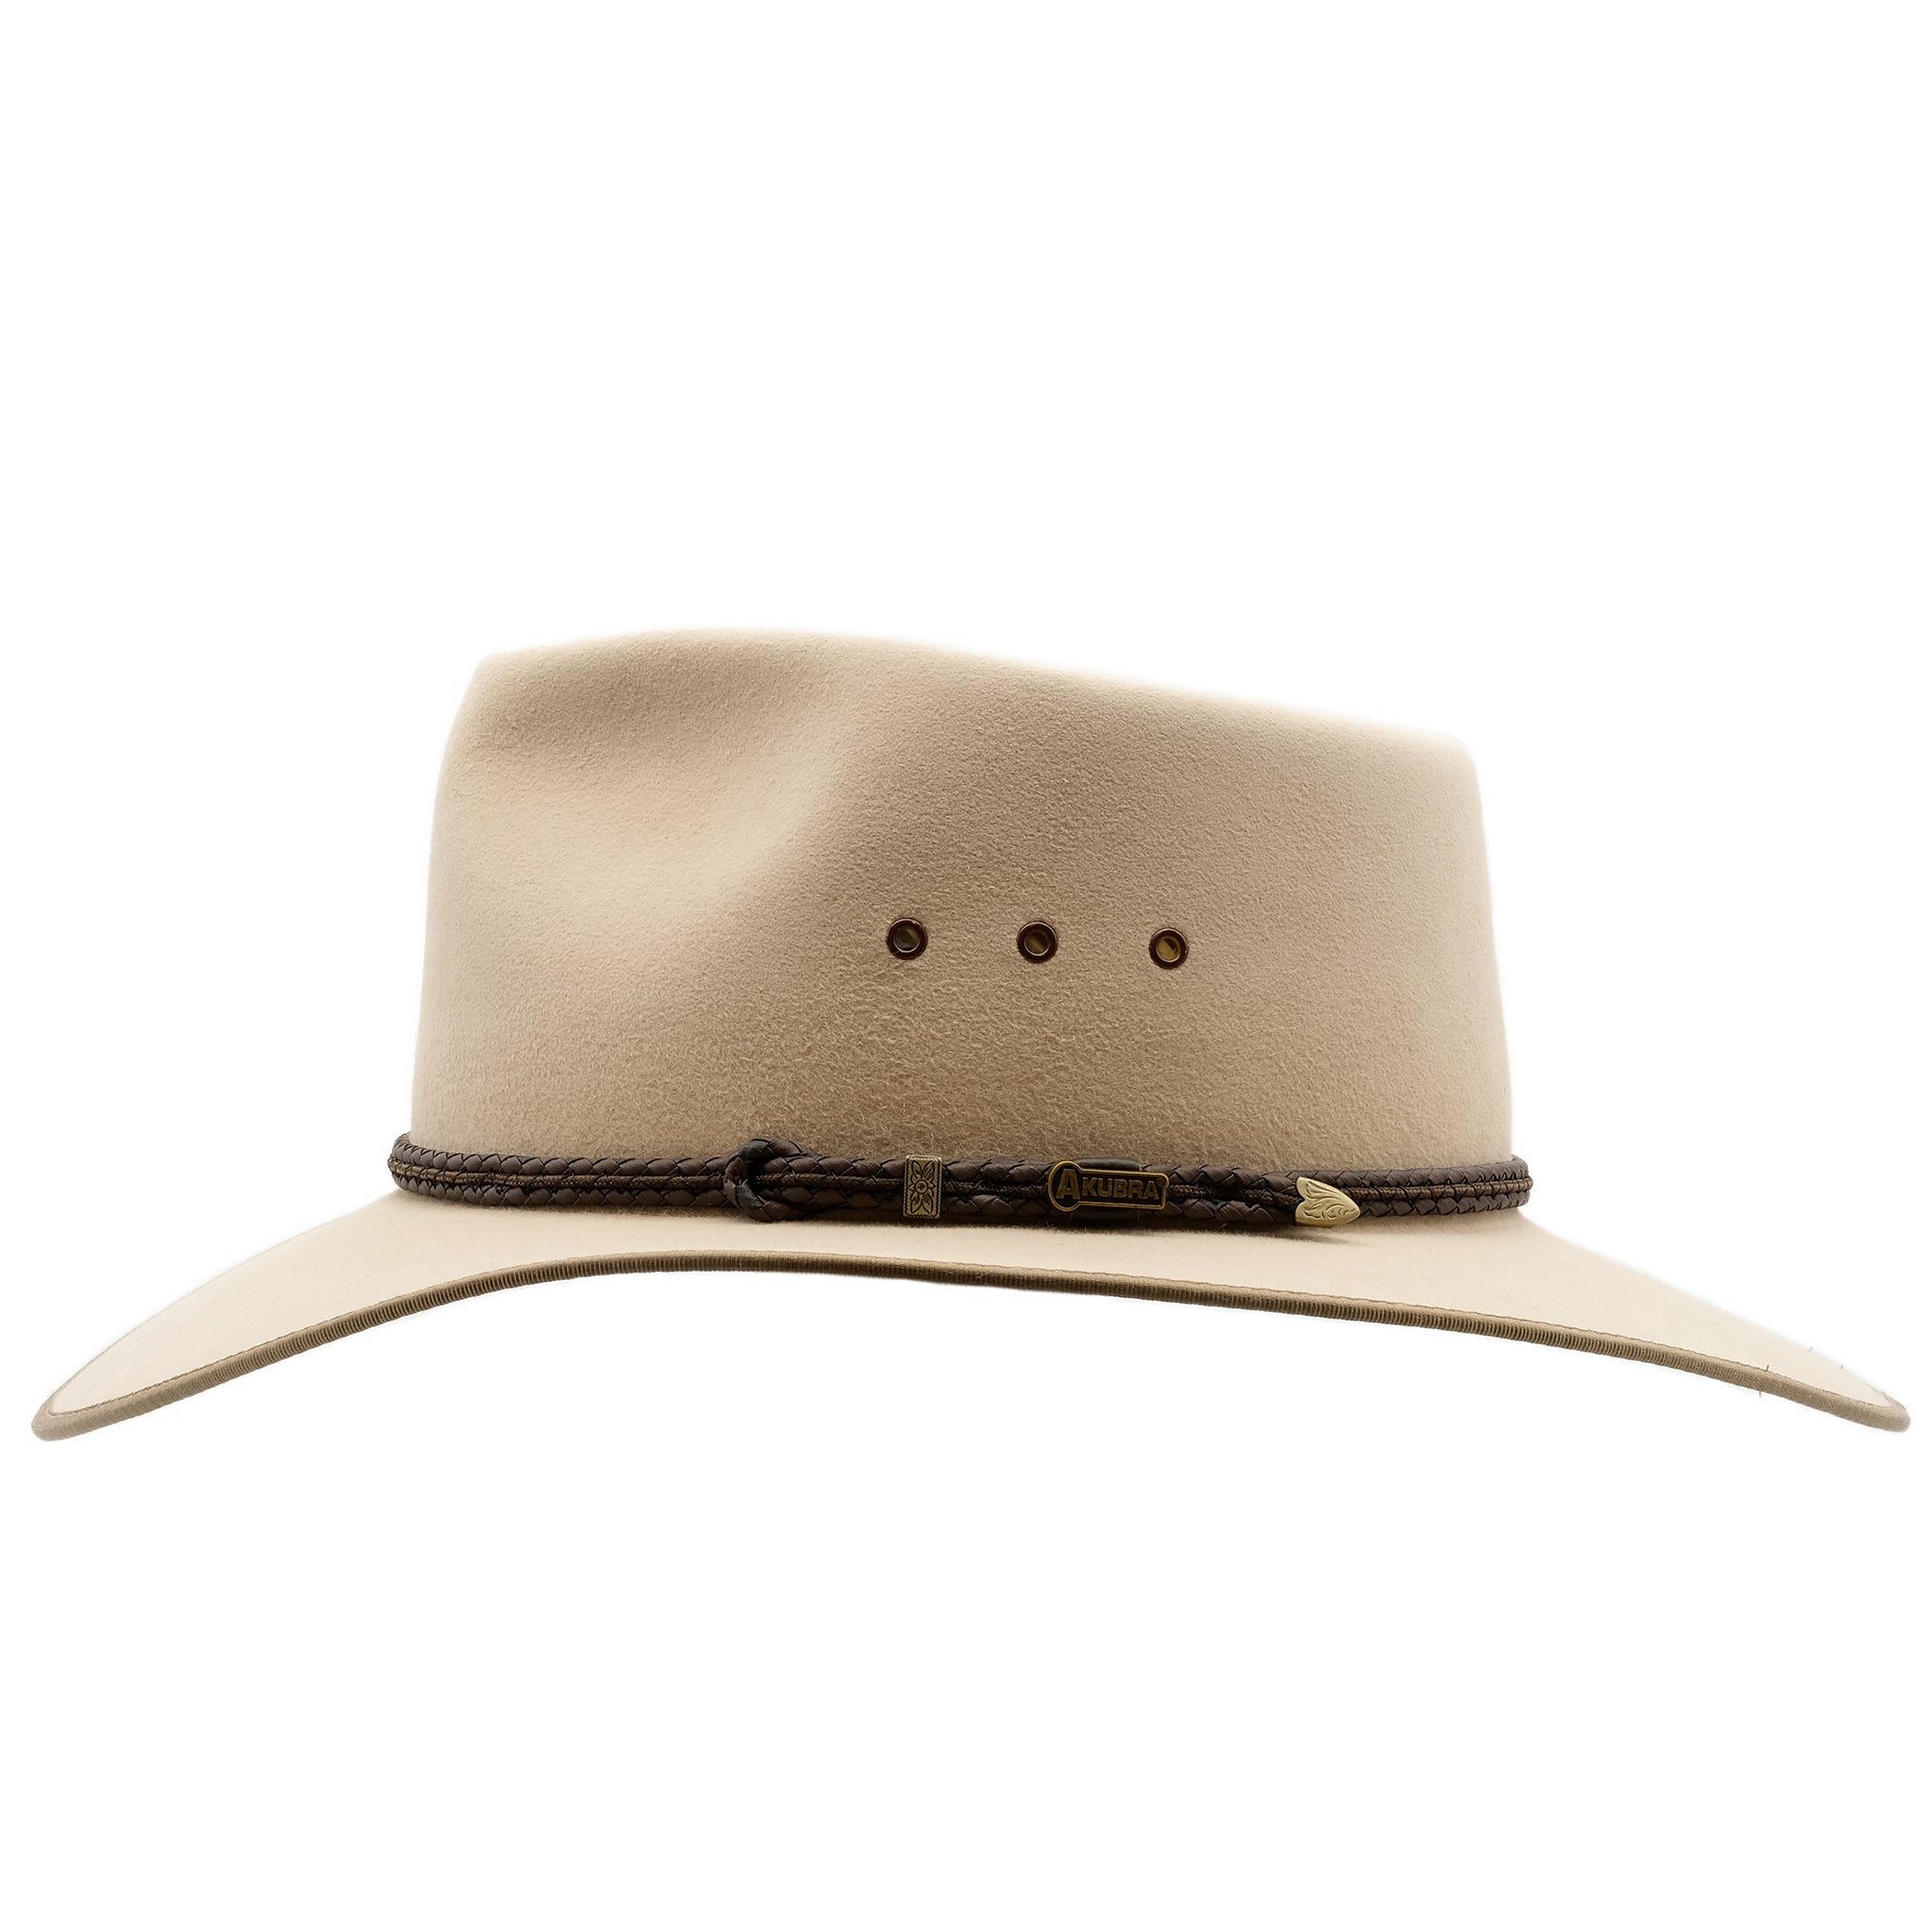 side view of the Akubra Cattleman hat in sand colour